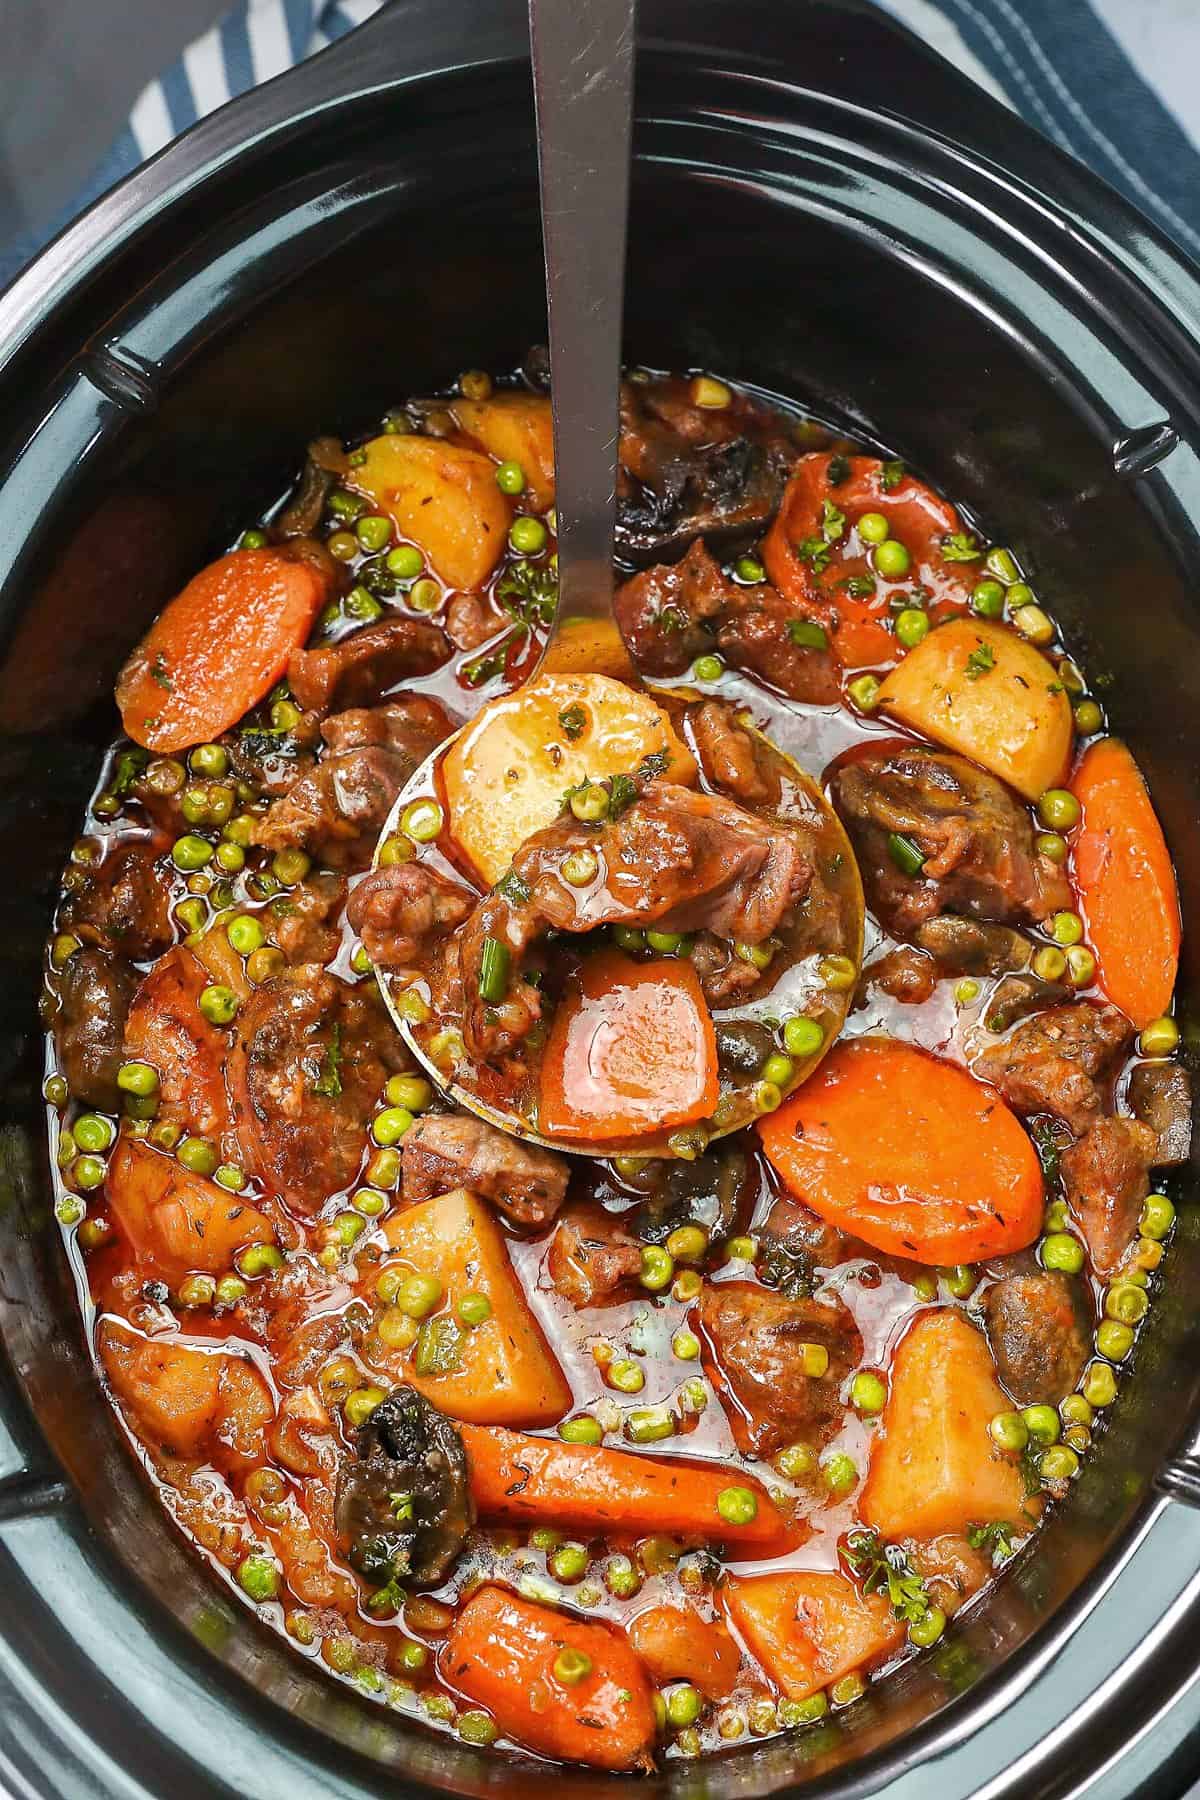 Delicious Lamb stew fresh from the slow cooker ready to enjoy